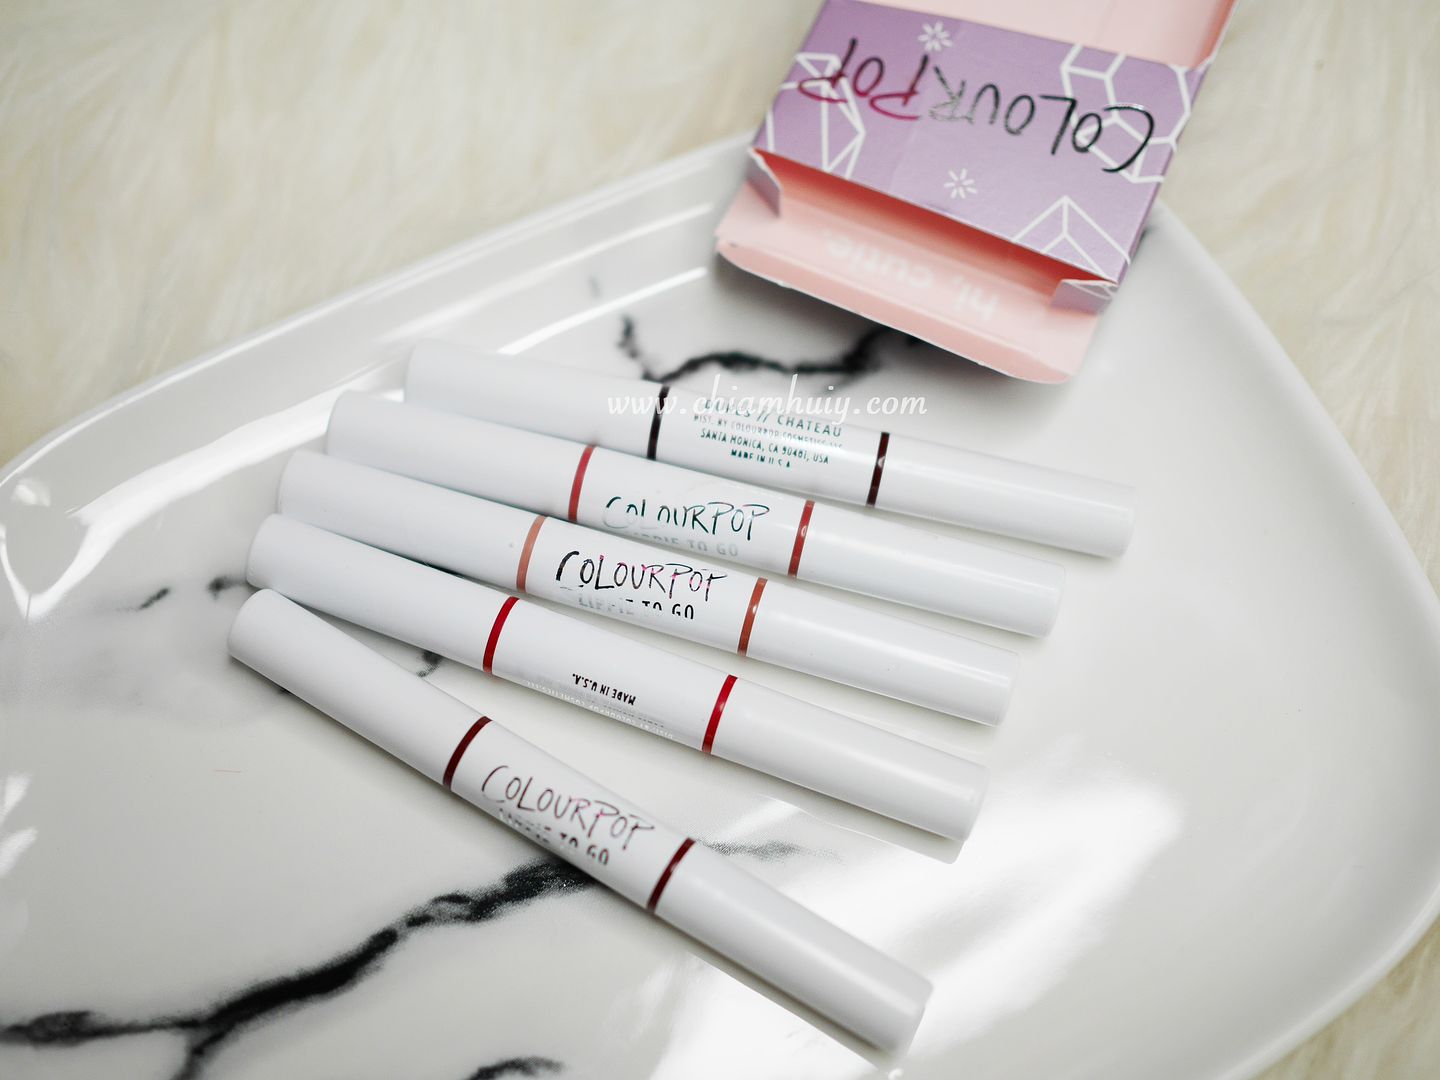  photo colourpop hot and trot2_zpsgsf75p59.jpg